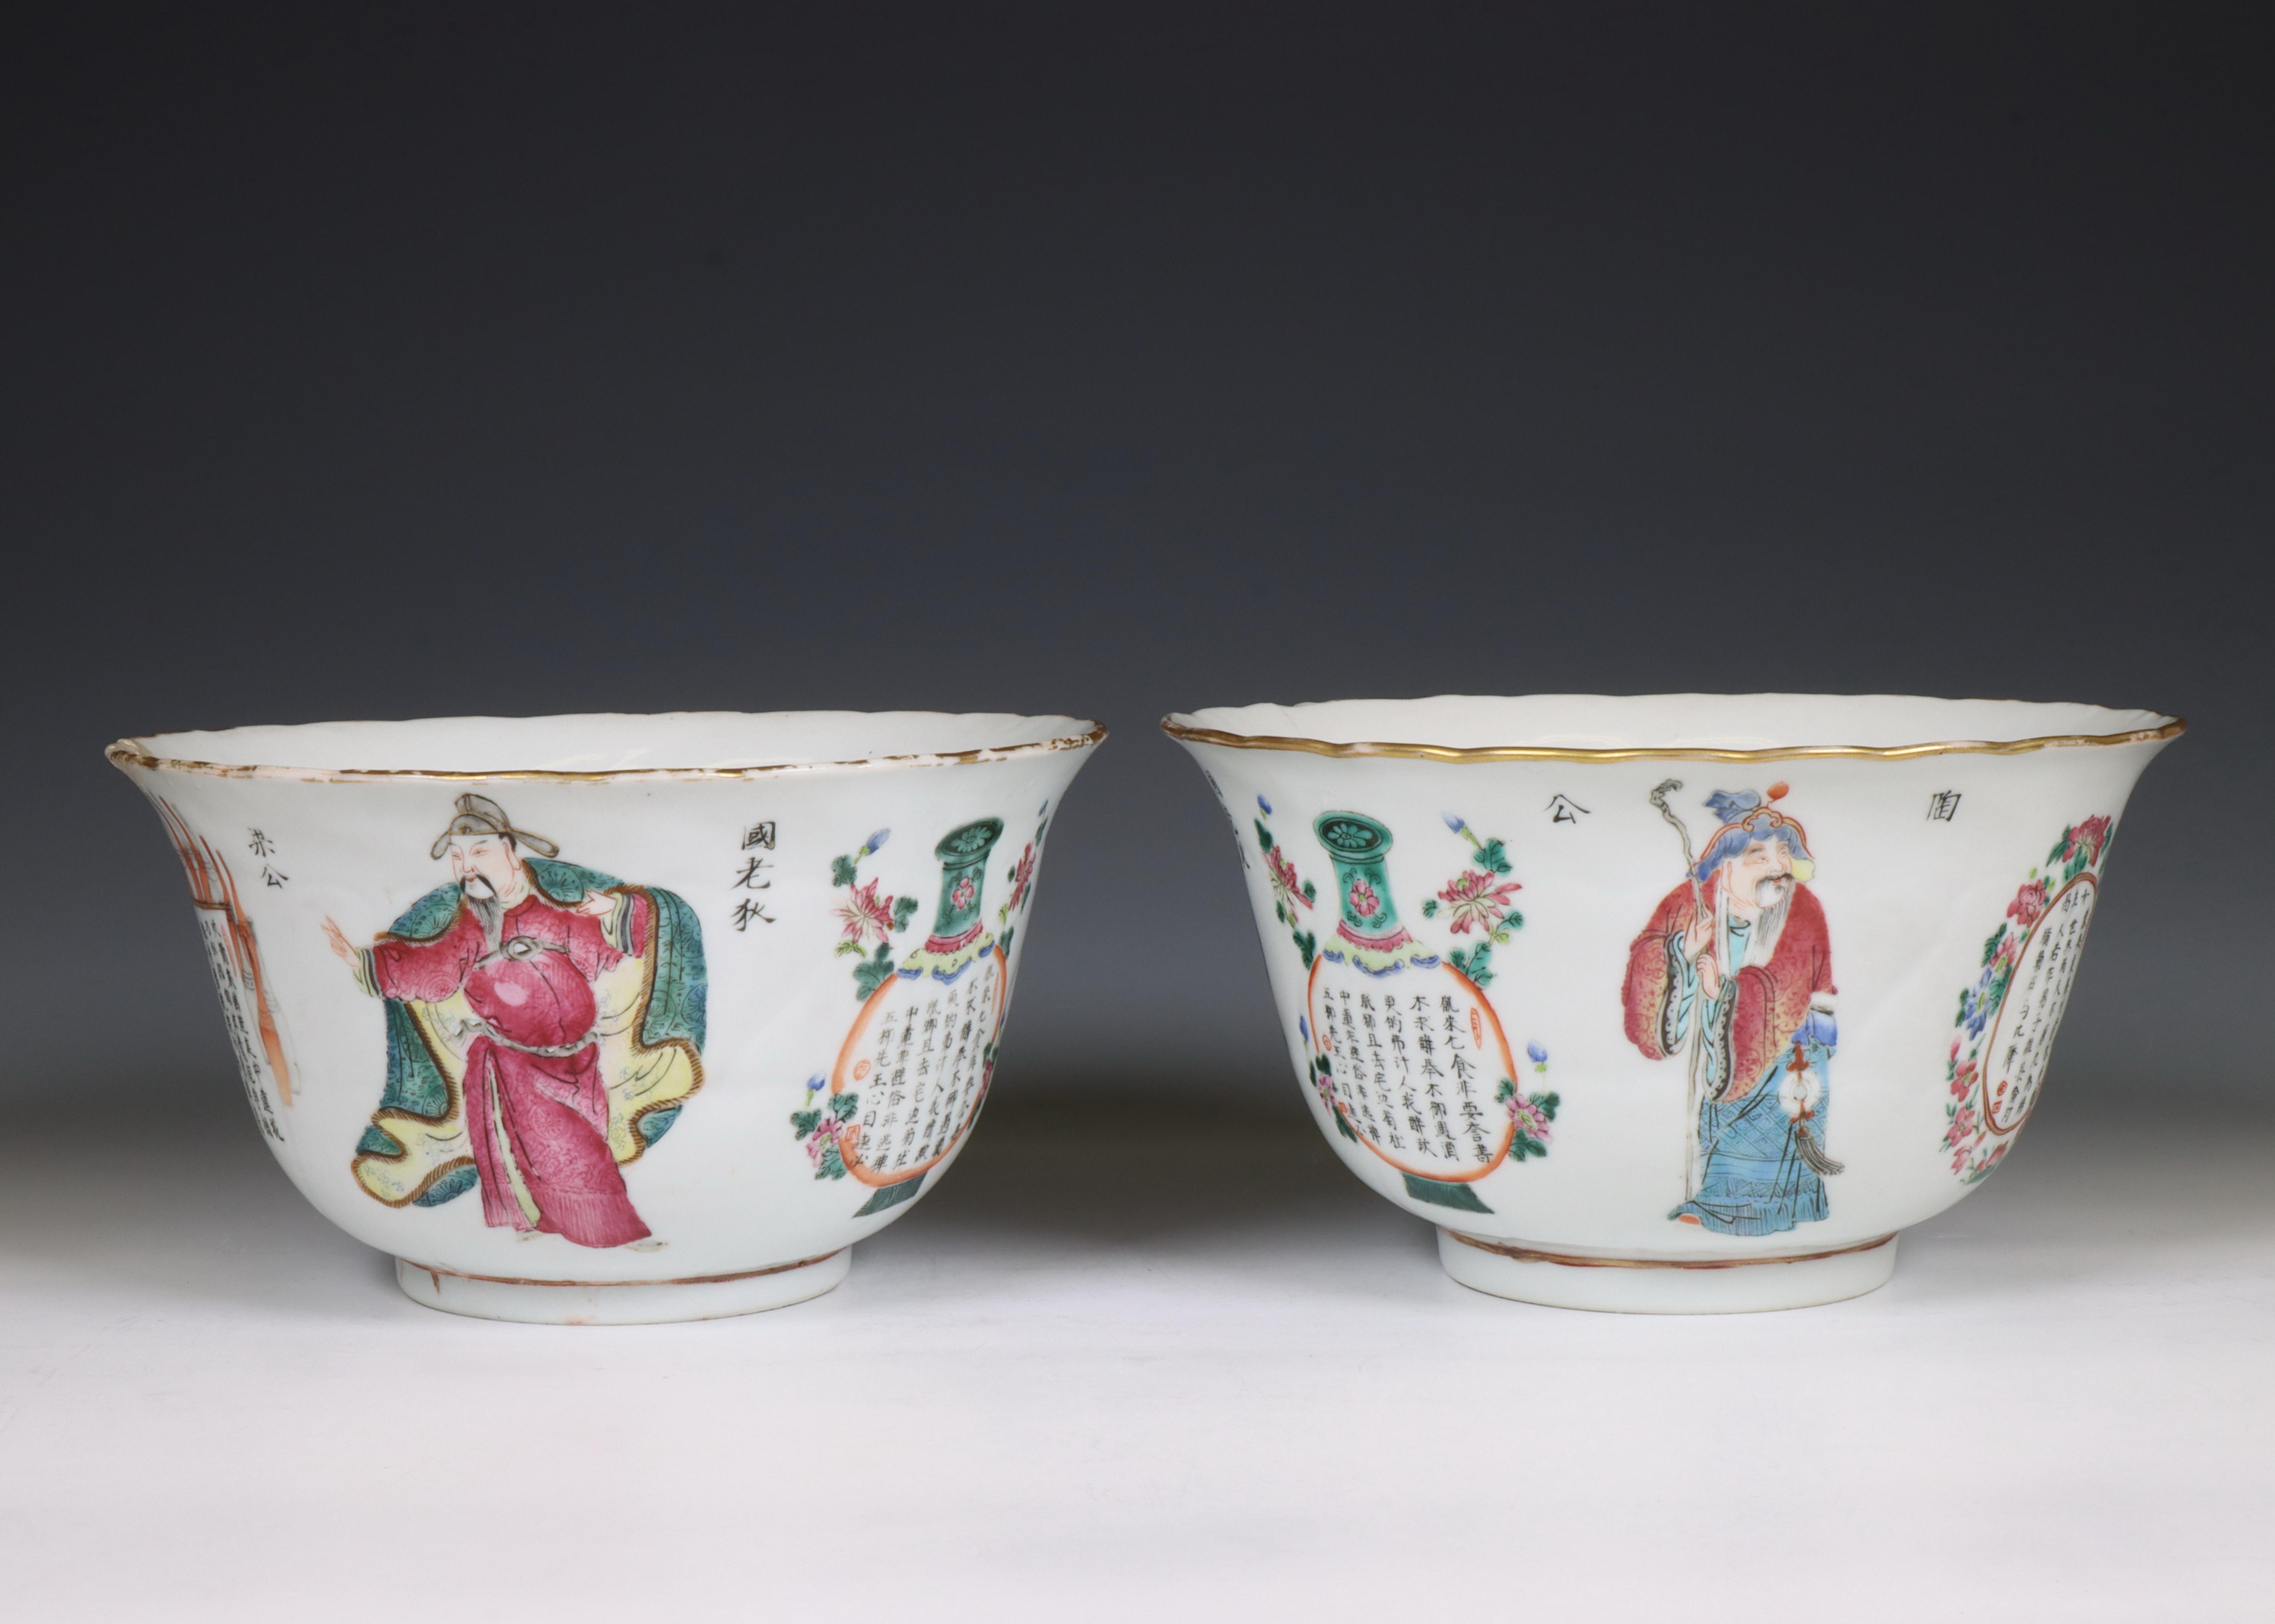 China, two famille rose porcelain 'Wu Shuang Pu' bowls, late Qing dynasty (1644-1912), - Image 3 of 9